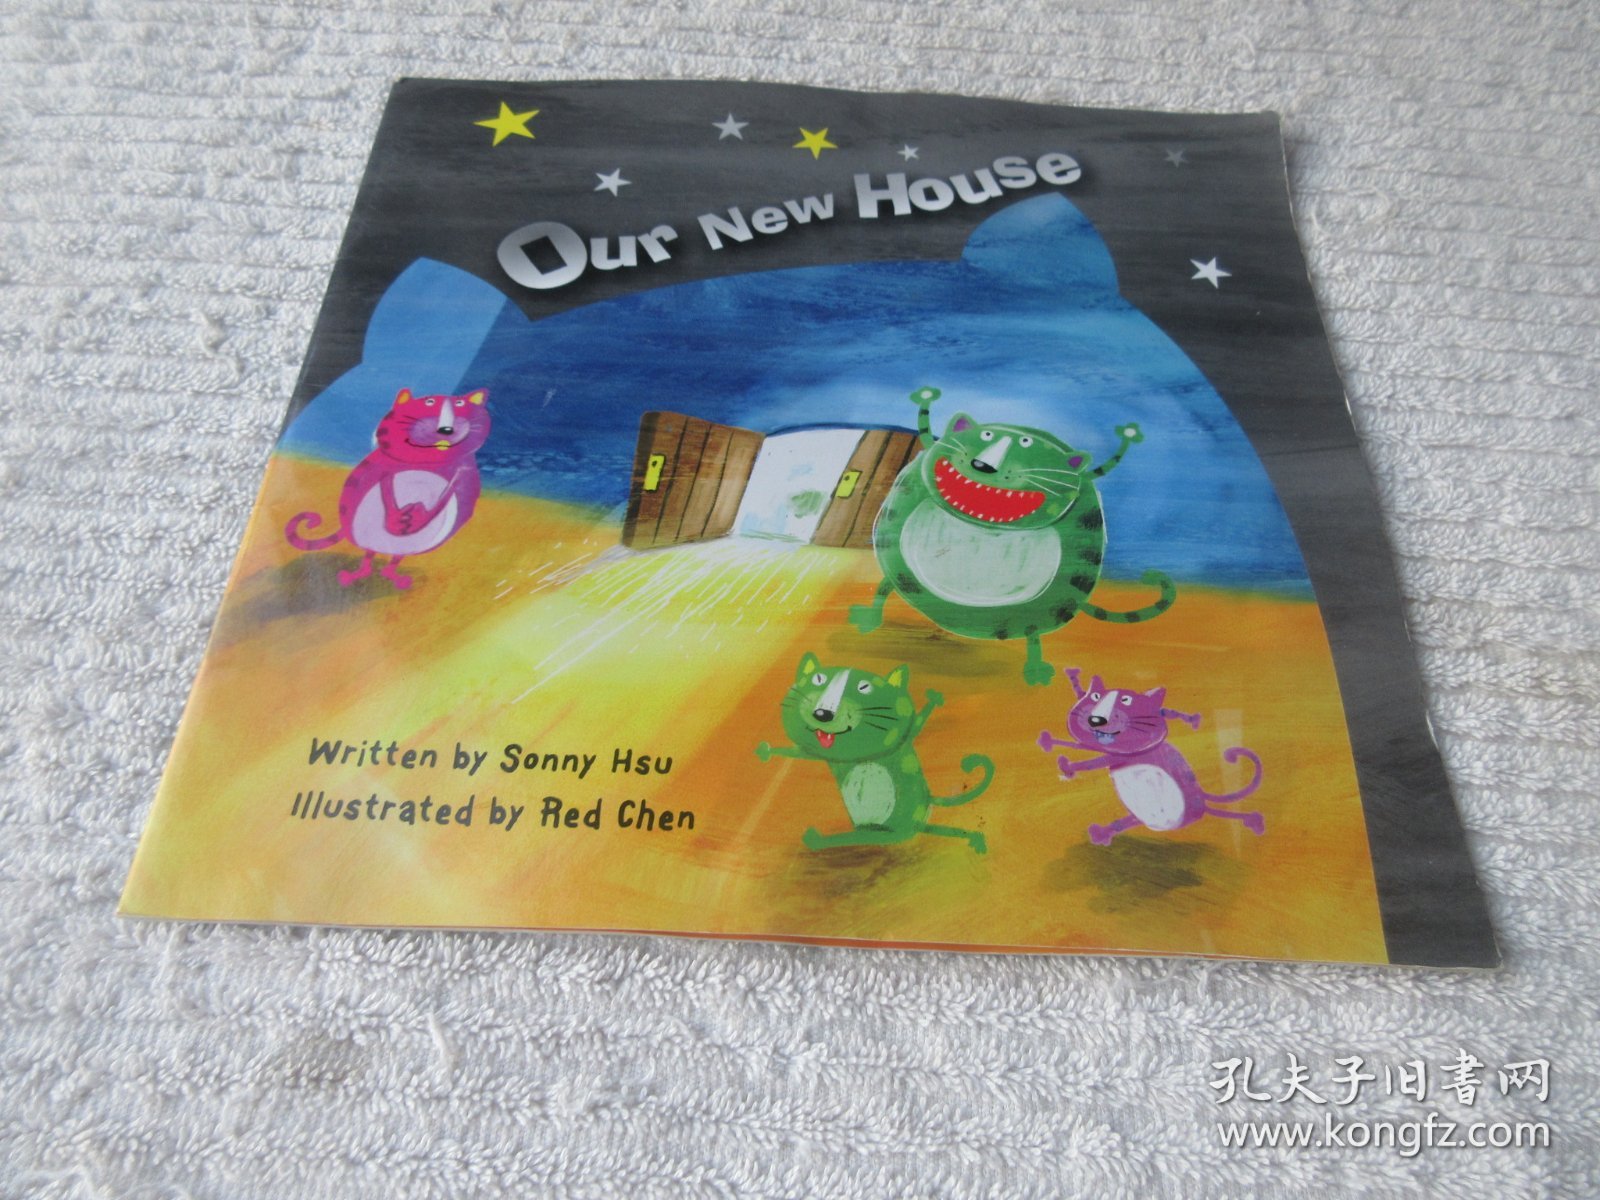 Our new House（Apple Tree Series High-5 Kids! Love Reading）